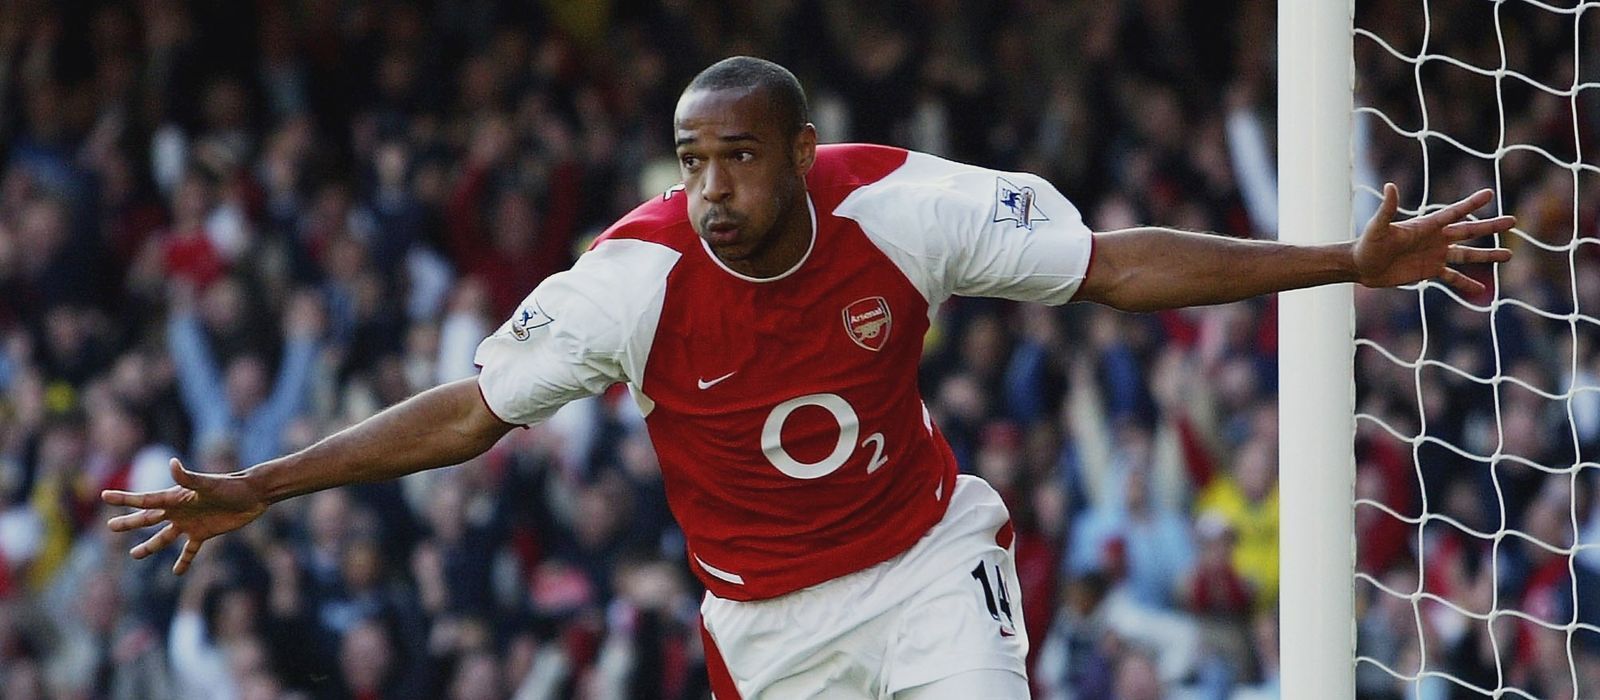 Thierry Henry, alongside Alan Shearer, was the first inductee into the Premier League Hall of Fame.